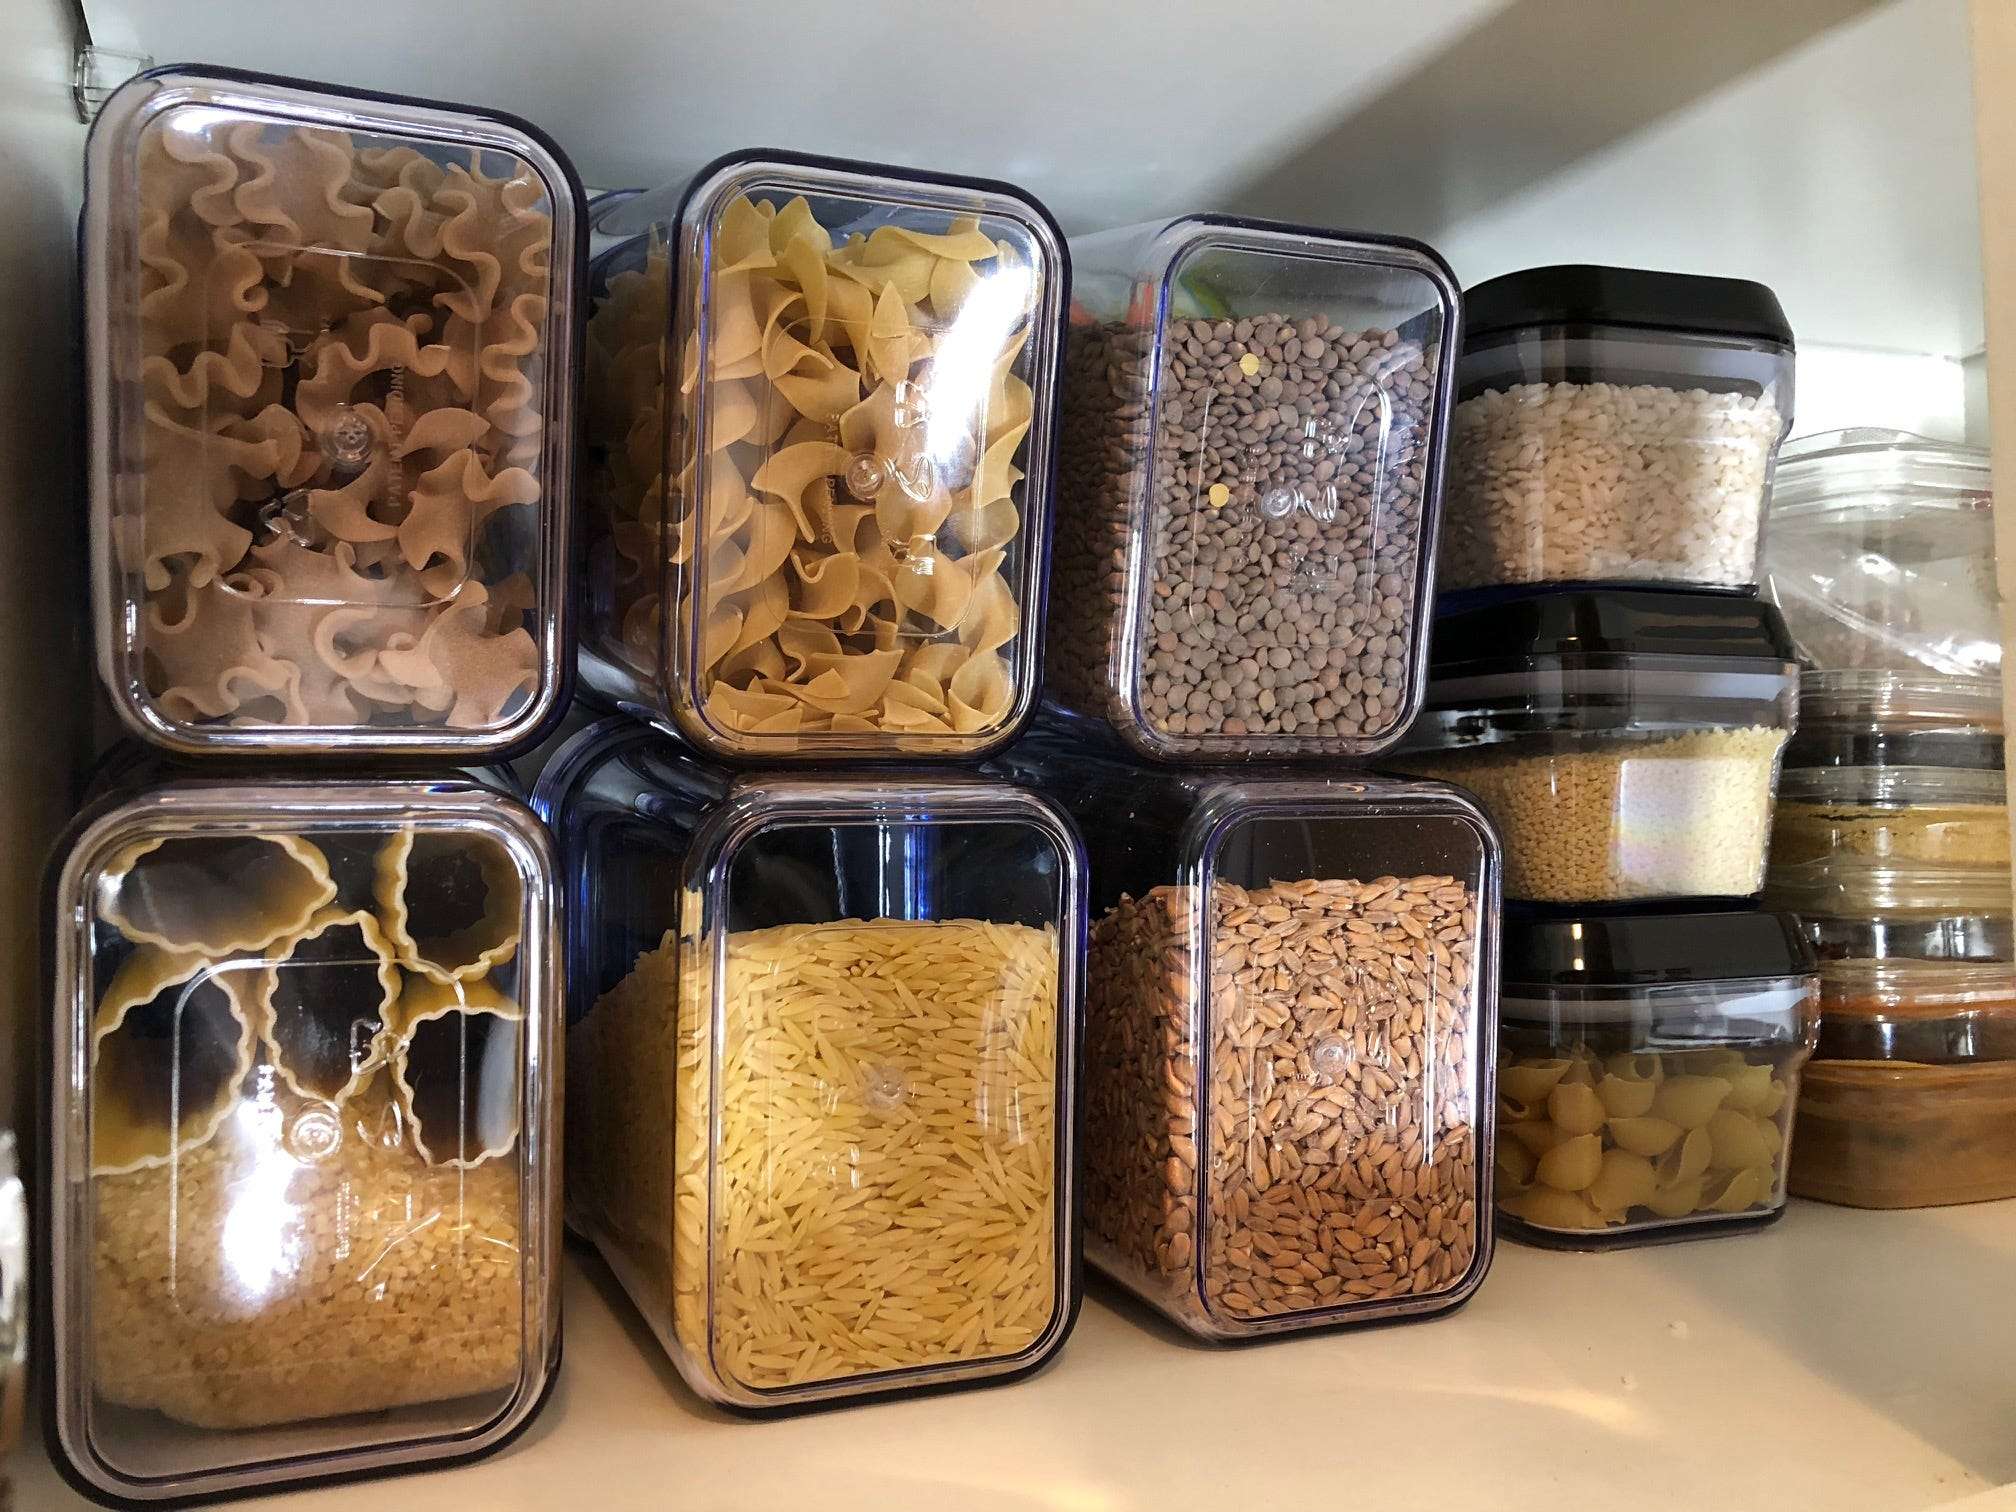 https://www.businessinsider.in/photo/75762246/i-organized-my-kitchen-pantry-with-these-air-tight-storage-containers-and-can-finally-see-everything-in-my-cabinets.jpg?imgsize=425441